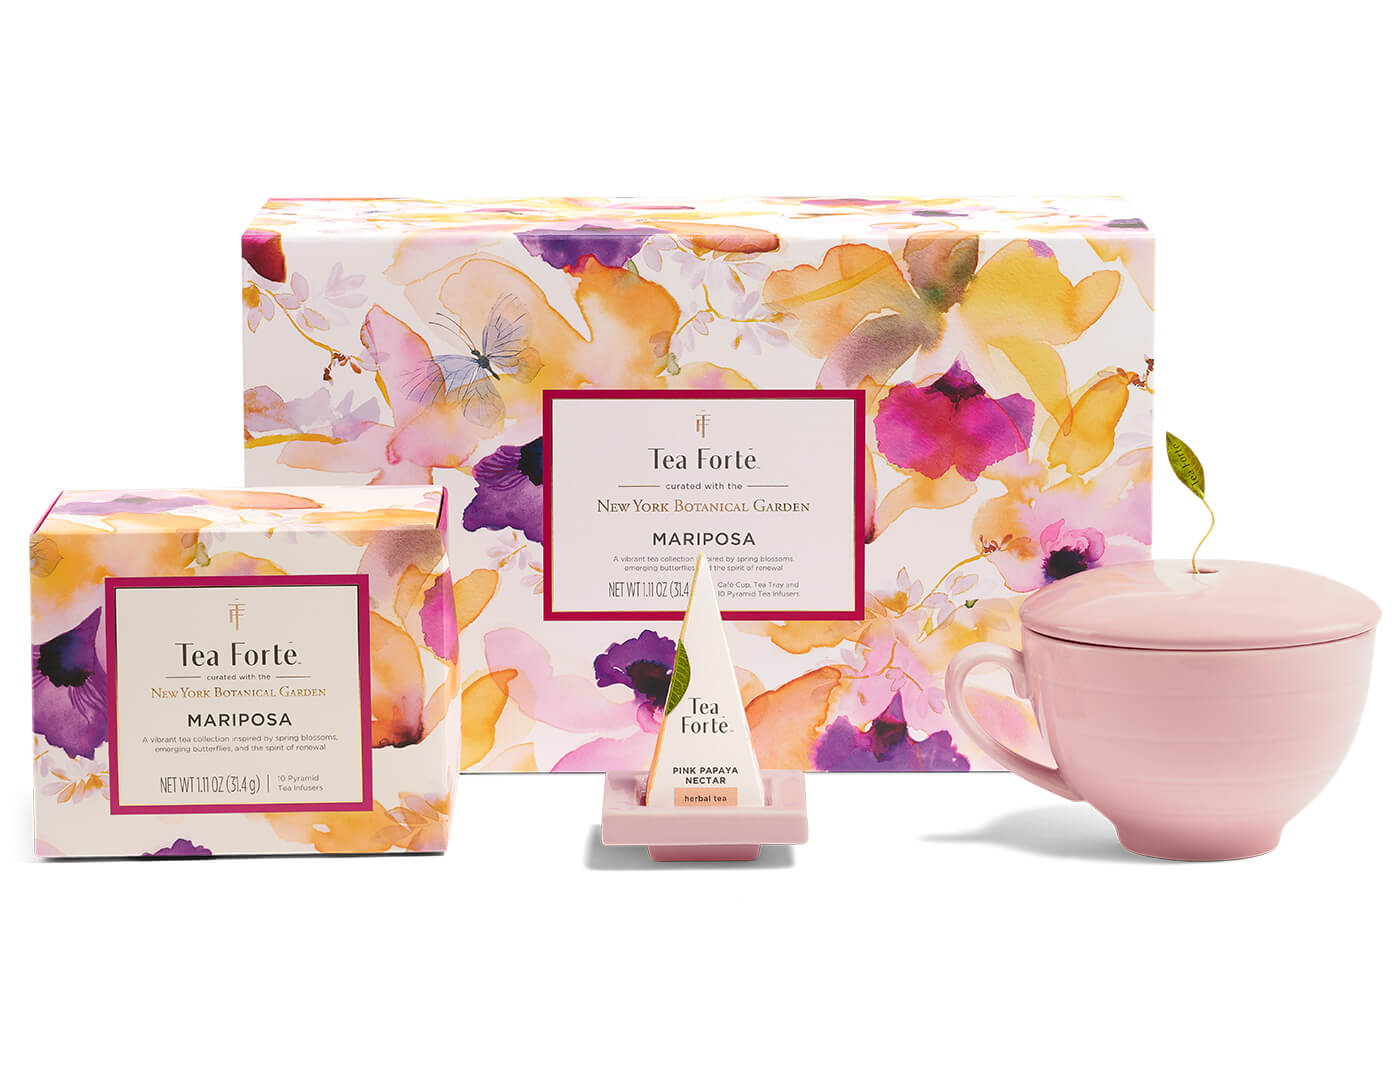 Mariposa Gift Set of 10 pyramid tea influsers, one Tea Tray and one Rose Pink Café Cup